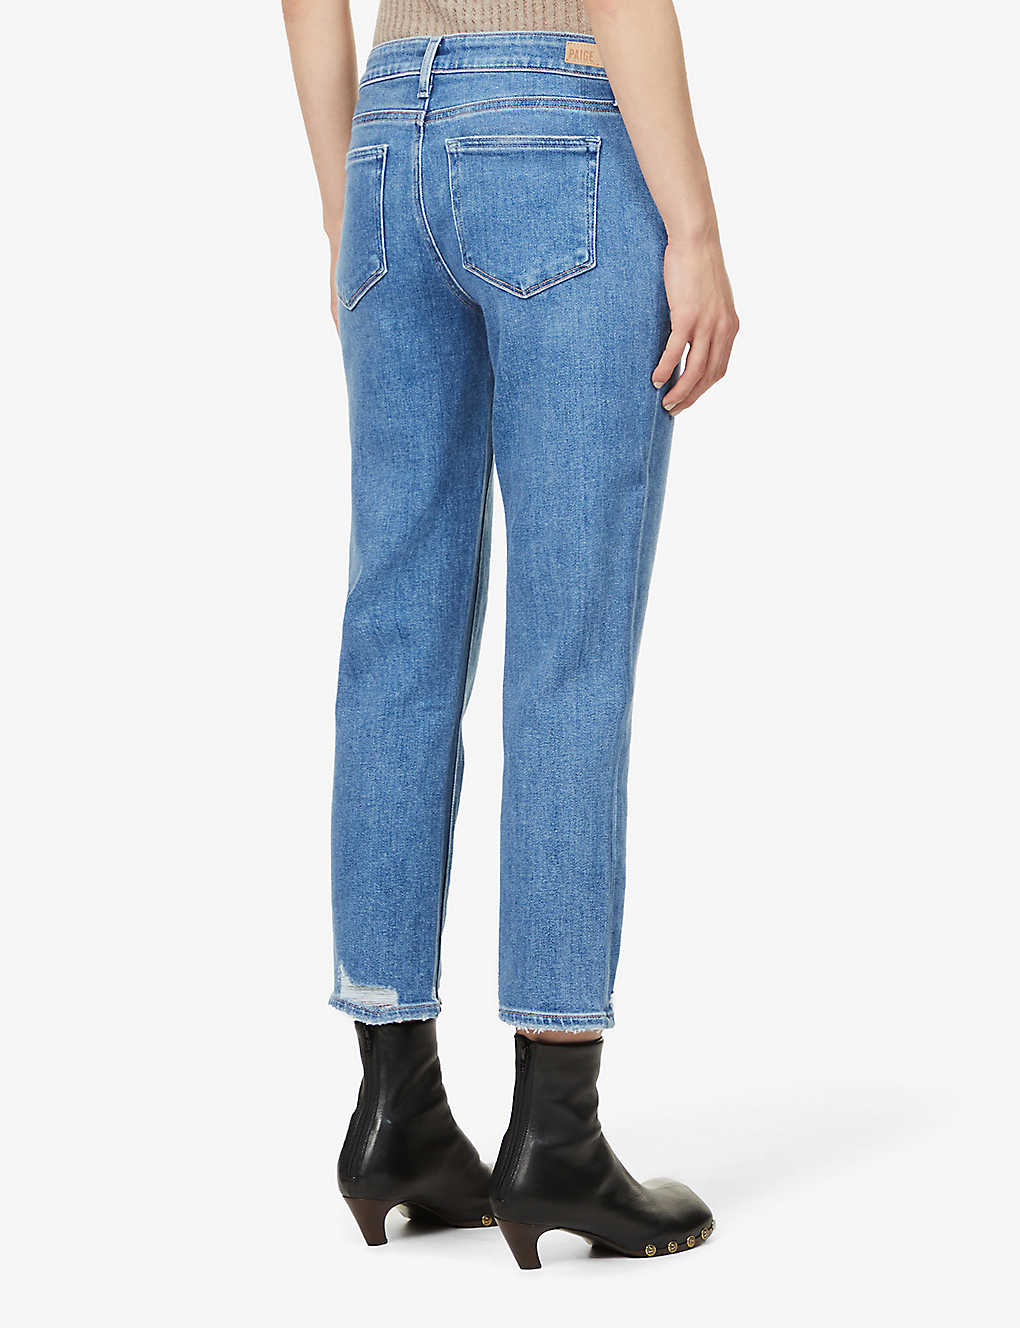 Boyfriend skinny jeans in a mid wash and distressing classic five pocket design